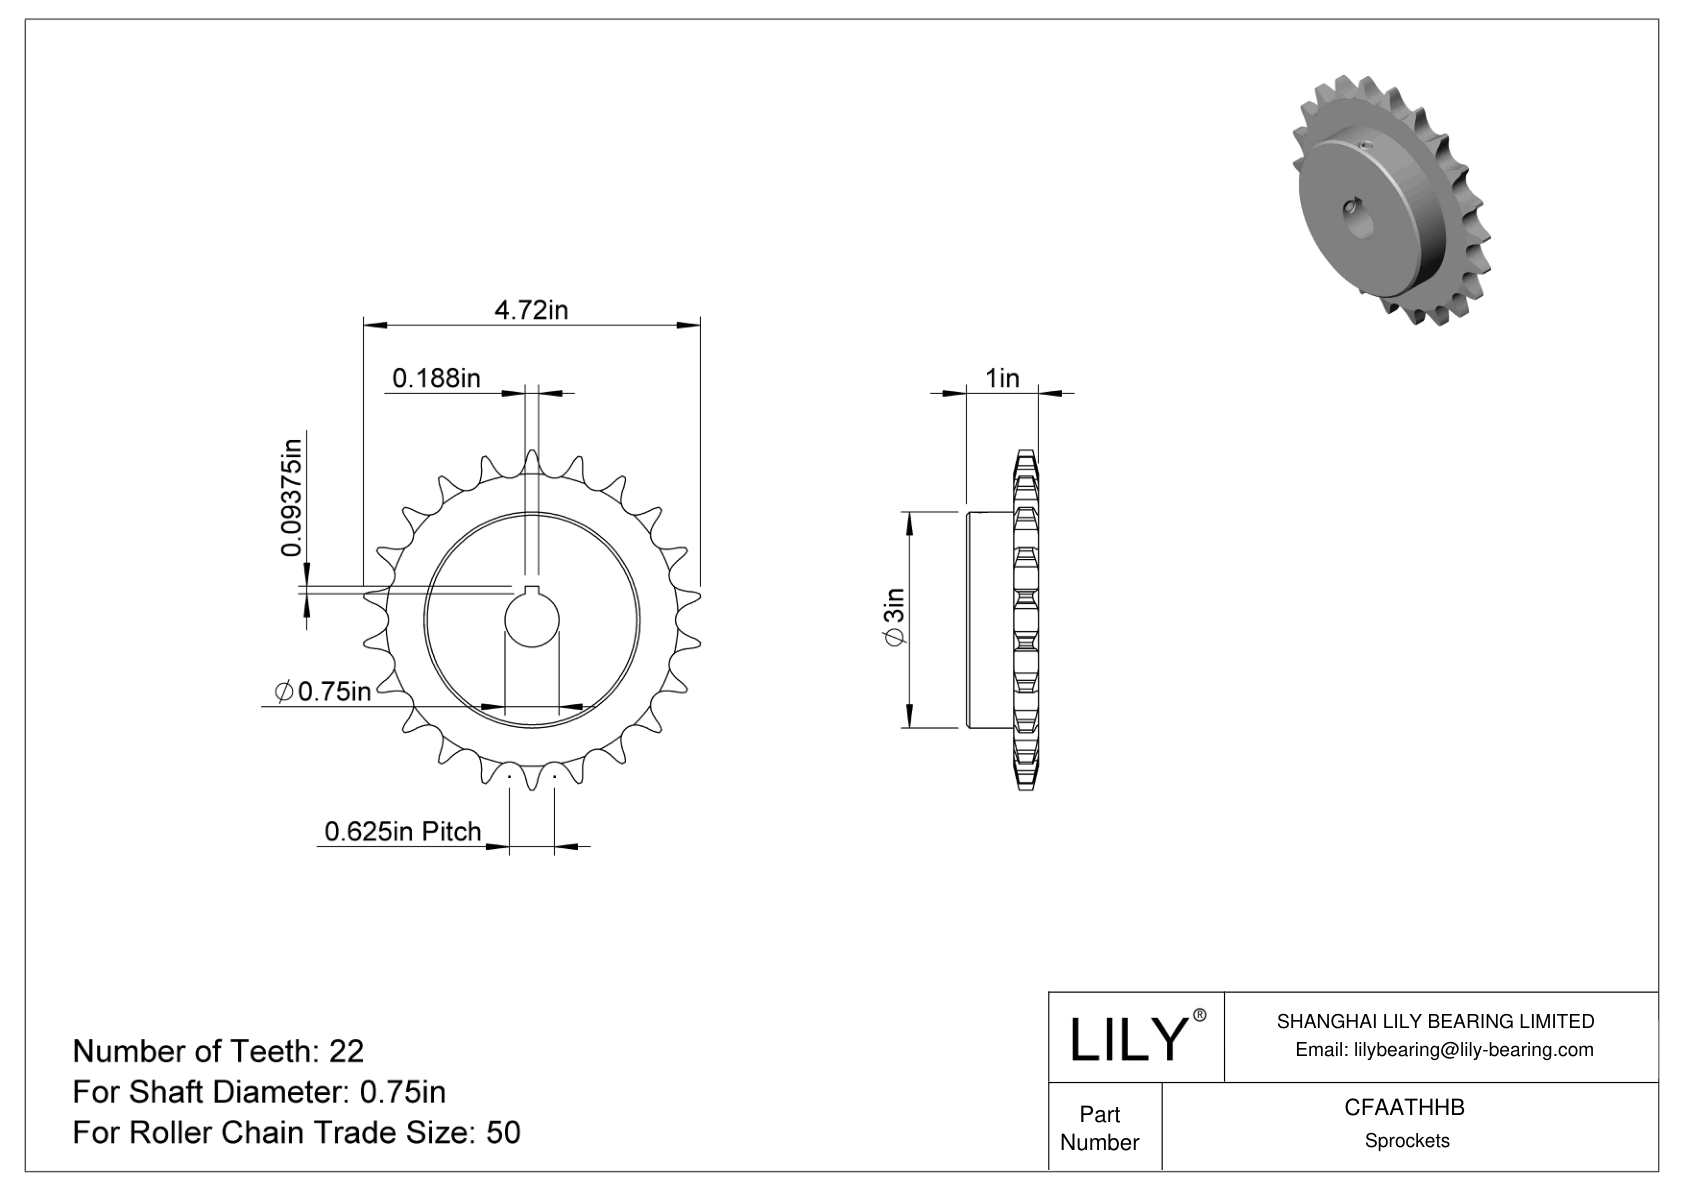 CFAATHHB Wear-Resistant Sprockets for ANSI Roller Chain cad drawing